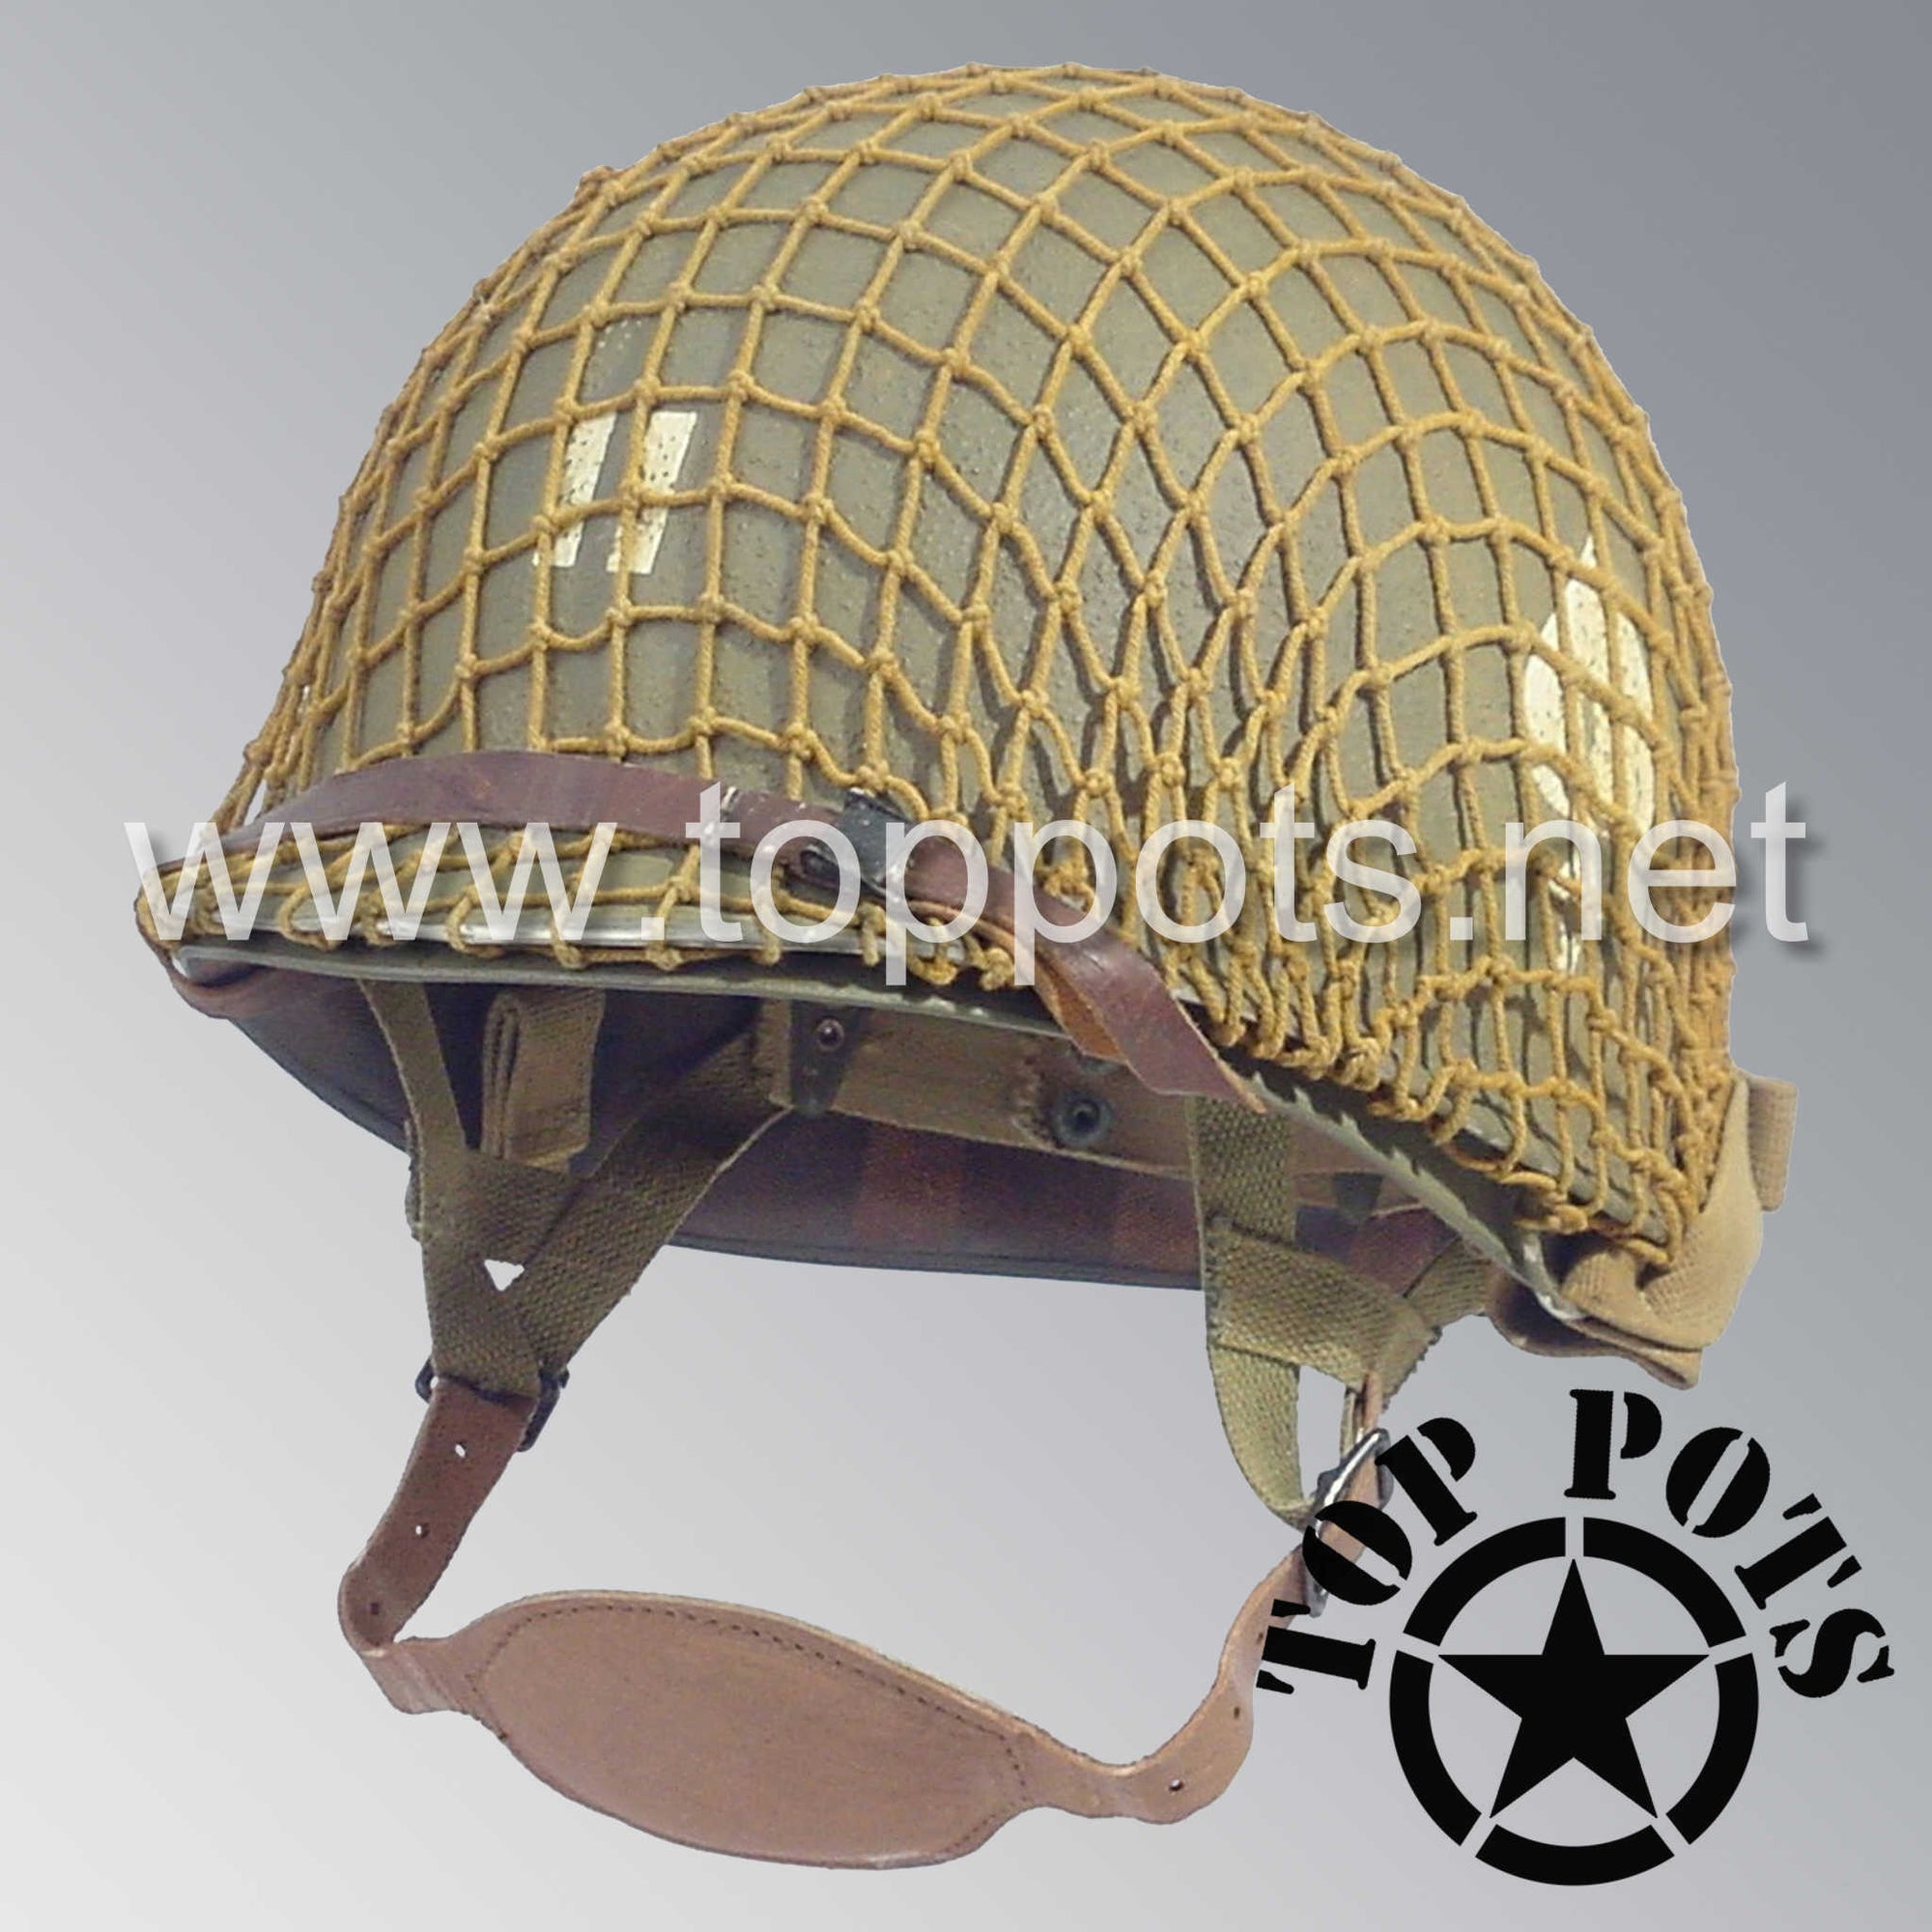 WWII US Army Aged Original M2 Paratrooper Airborne Helmet D Bale Shell and Liner with 506th PIR 2nd Battalion Officer Captain Rank Emblem with Net